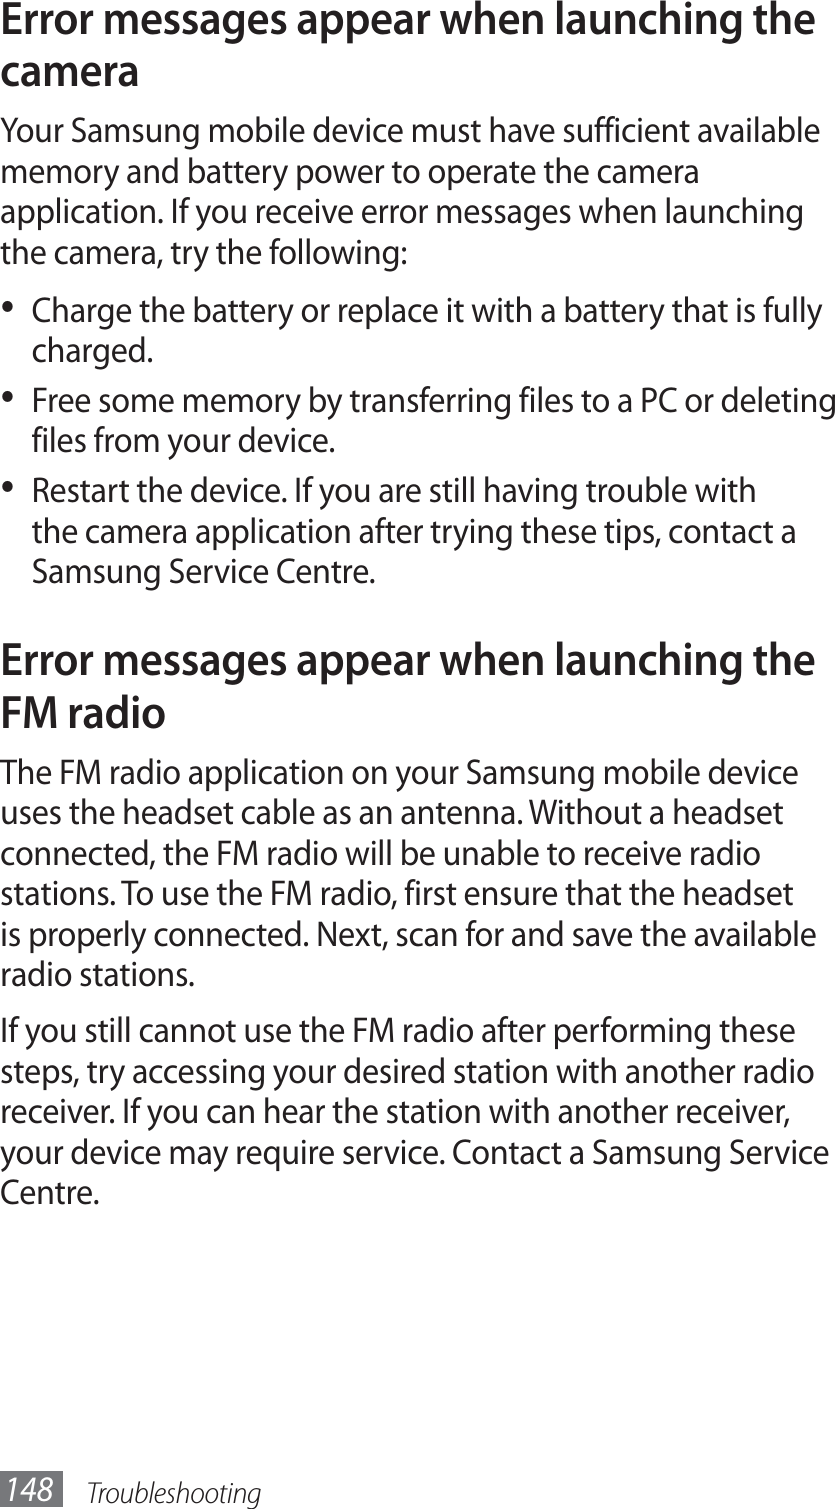 Troubleshooting148Error messages appear when launching the cameraYour Samsung mobile device must have sufficient available memory and battery power to operate the camera application. If you receive error messages when launching the camera, try the following:Charge the battery or replace it with a battery that is fully • charged.Free some memory by transferring files to a PC or deleting • files from your device.Restart the device. If you are still having trouble with • the camera application after trying these tips, contact a Samsung Service Centre.Error messages appear when launching the FM radioThe FM radio application on your Samsung mobile device uses the headset cable as an antenna. Without a headset connected, the FM radio will be unable to receive radio stations. To use the FM radio, first ensure that the headset is properly connected. Next, scan for and save the available radio stations.If you still cannot use the FM radio after performing these steps, try accessing your desired station with another radio receiver. If you can hear the station with another receiver, your device may require service. Contact a Samsung Service Centre.